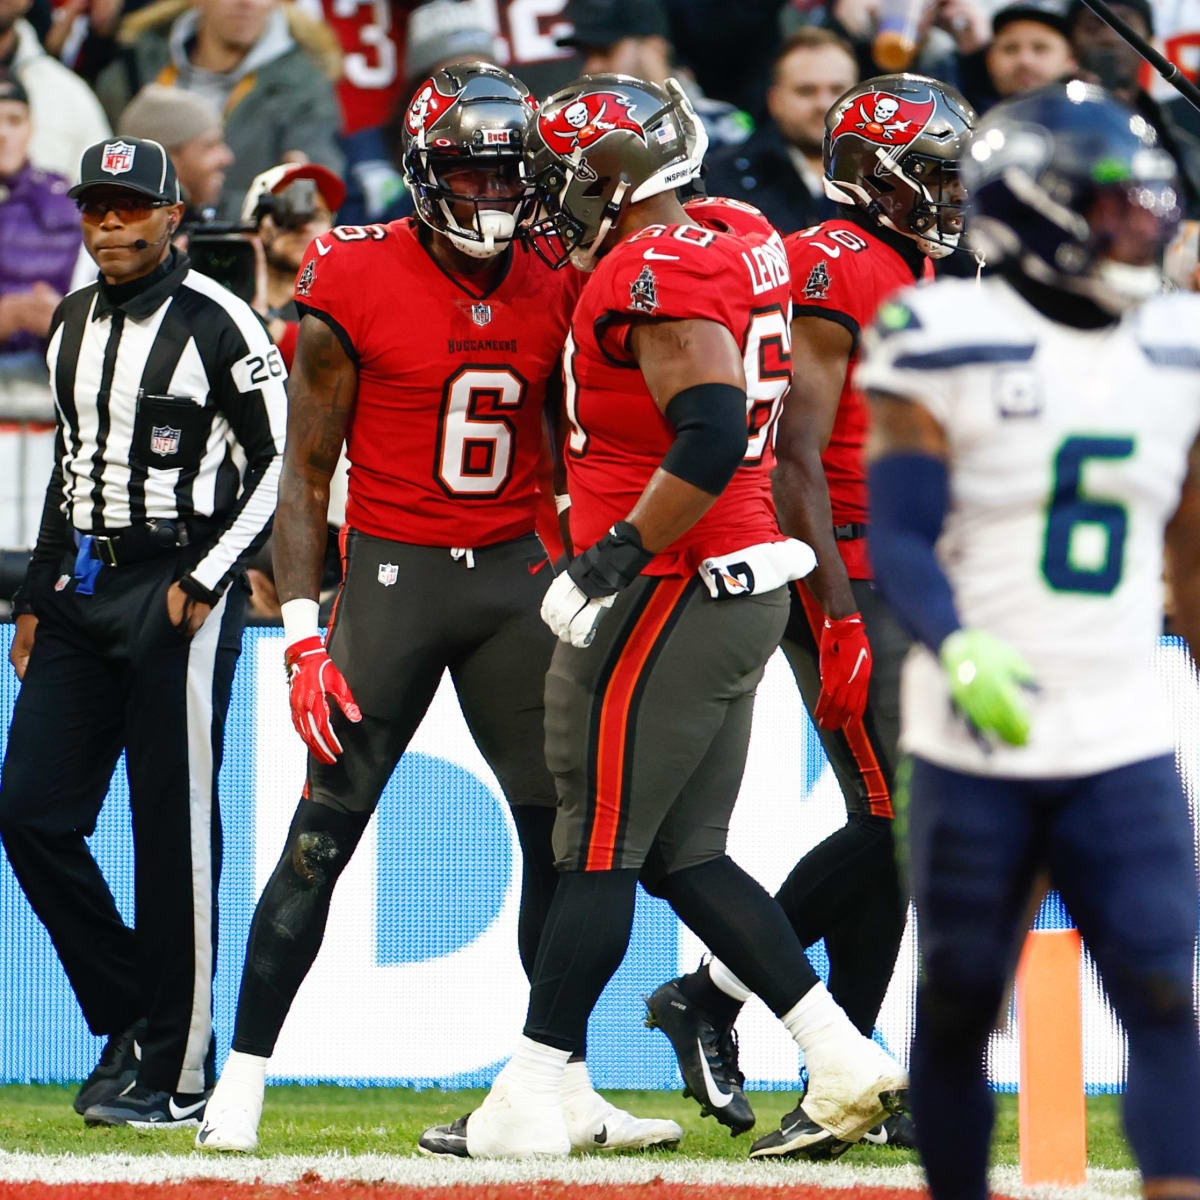 Seahawks come up short in 21-16 loss to Buc